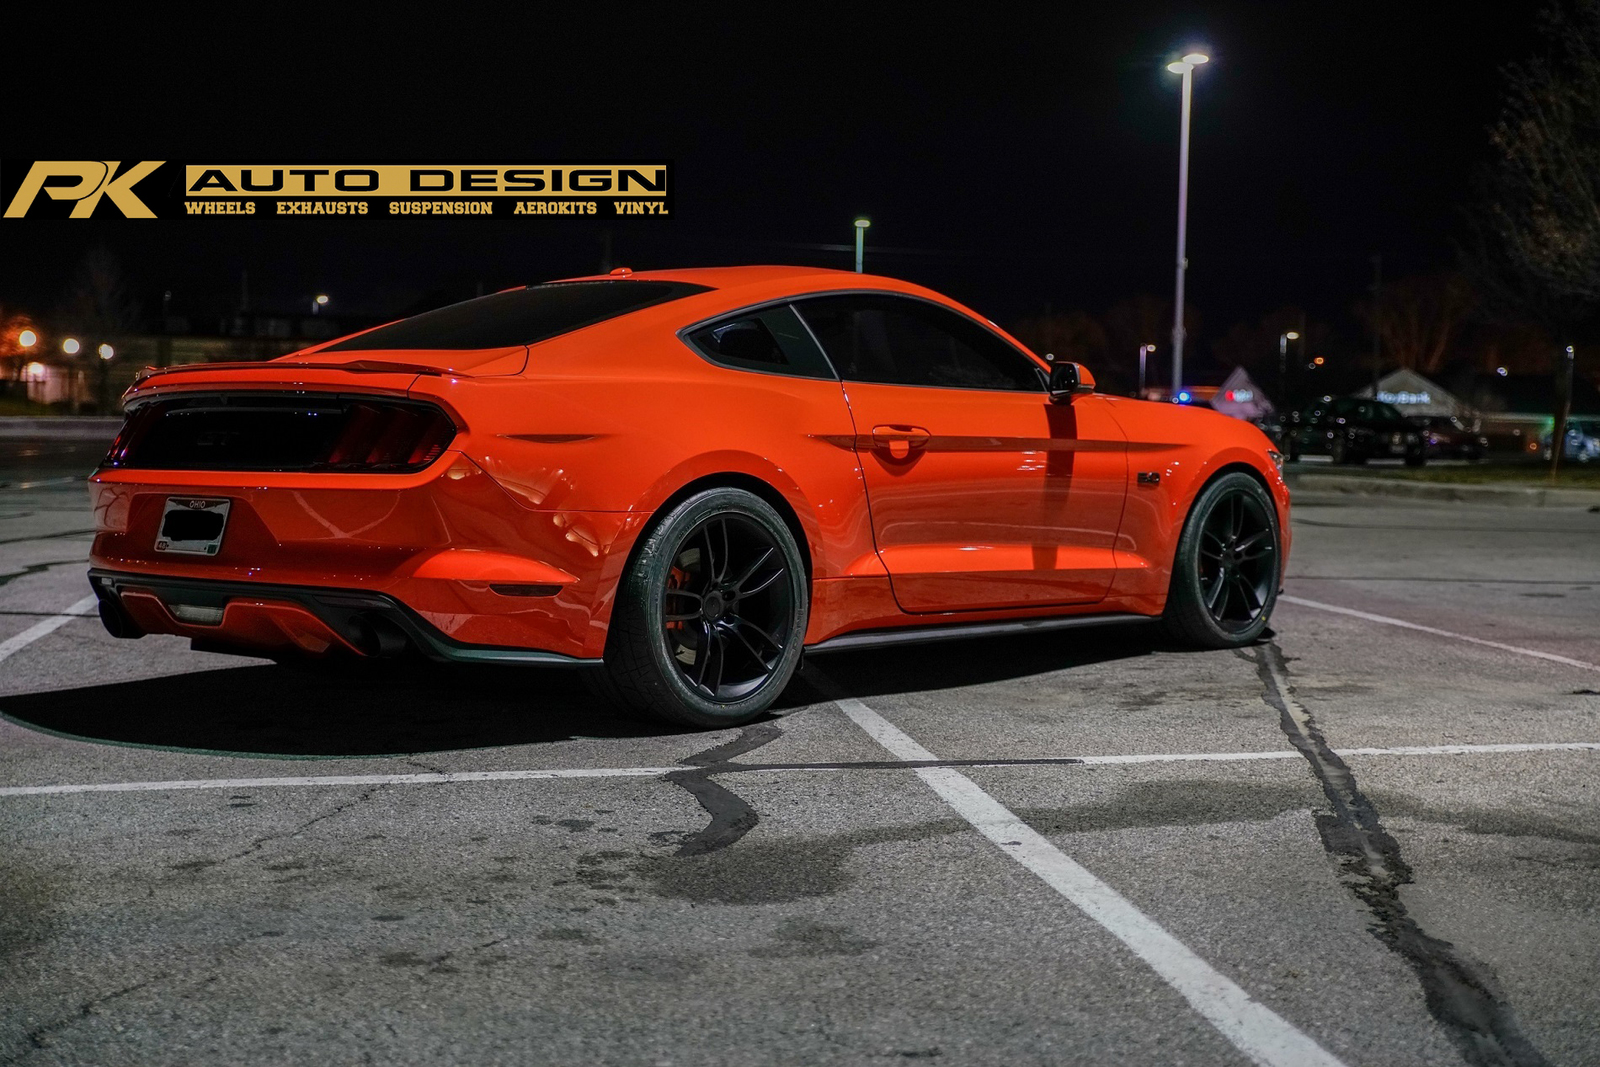 race-red-ford-mustang-gtpp-s550-mrr-m600-satin-black-ford-gt-replica-concave-wheels.jpg